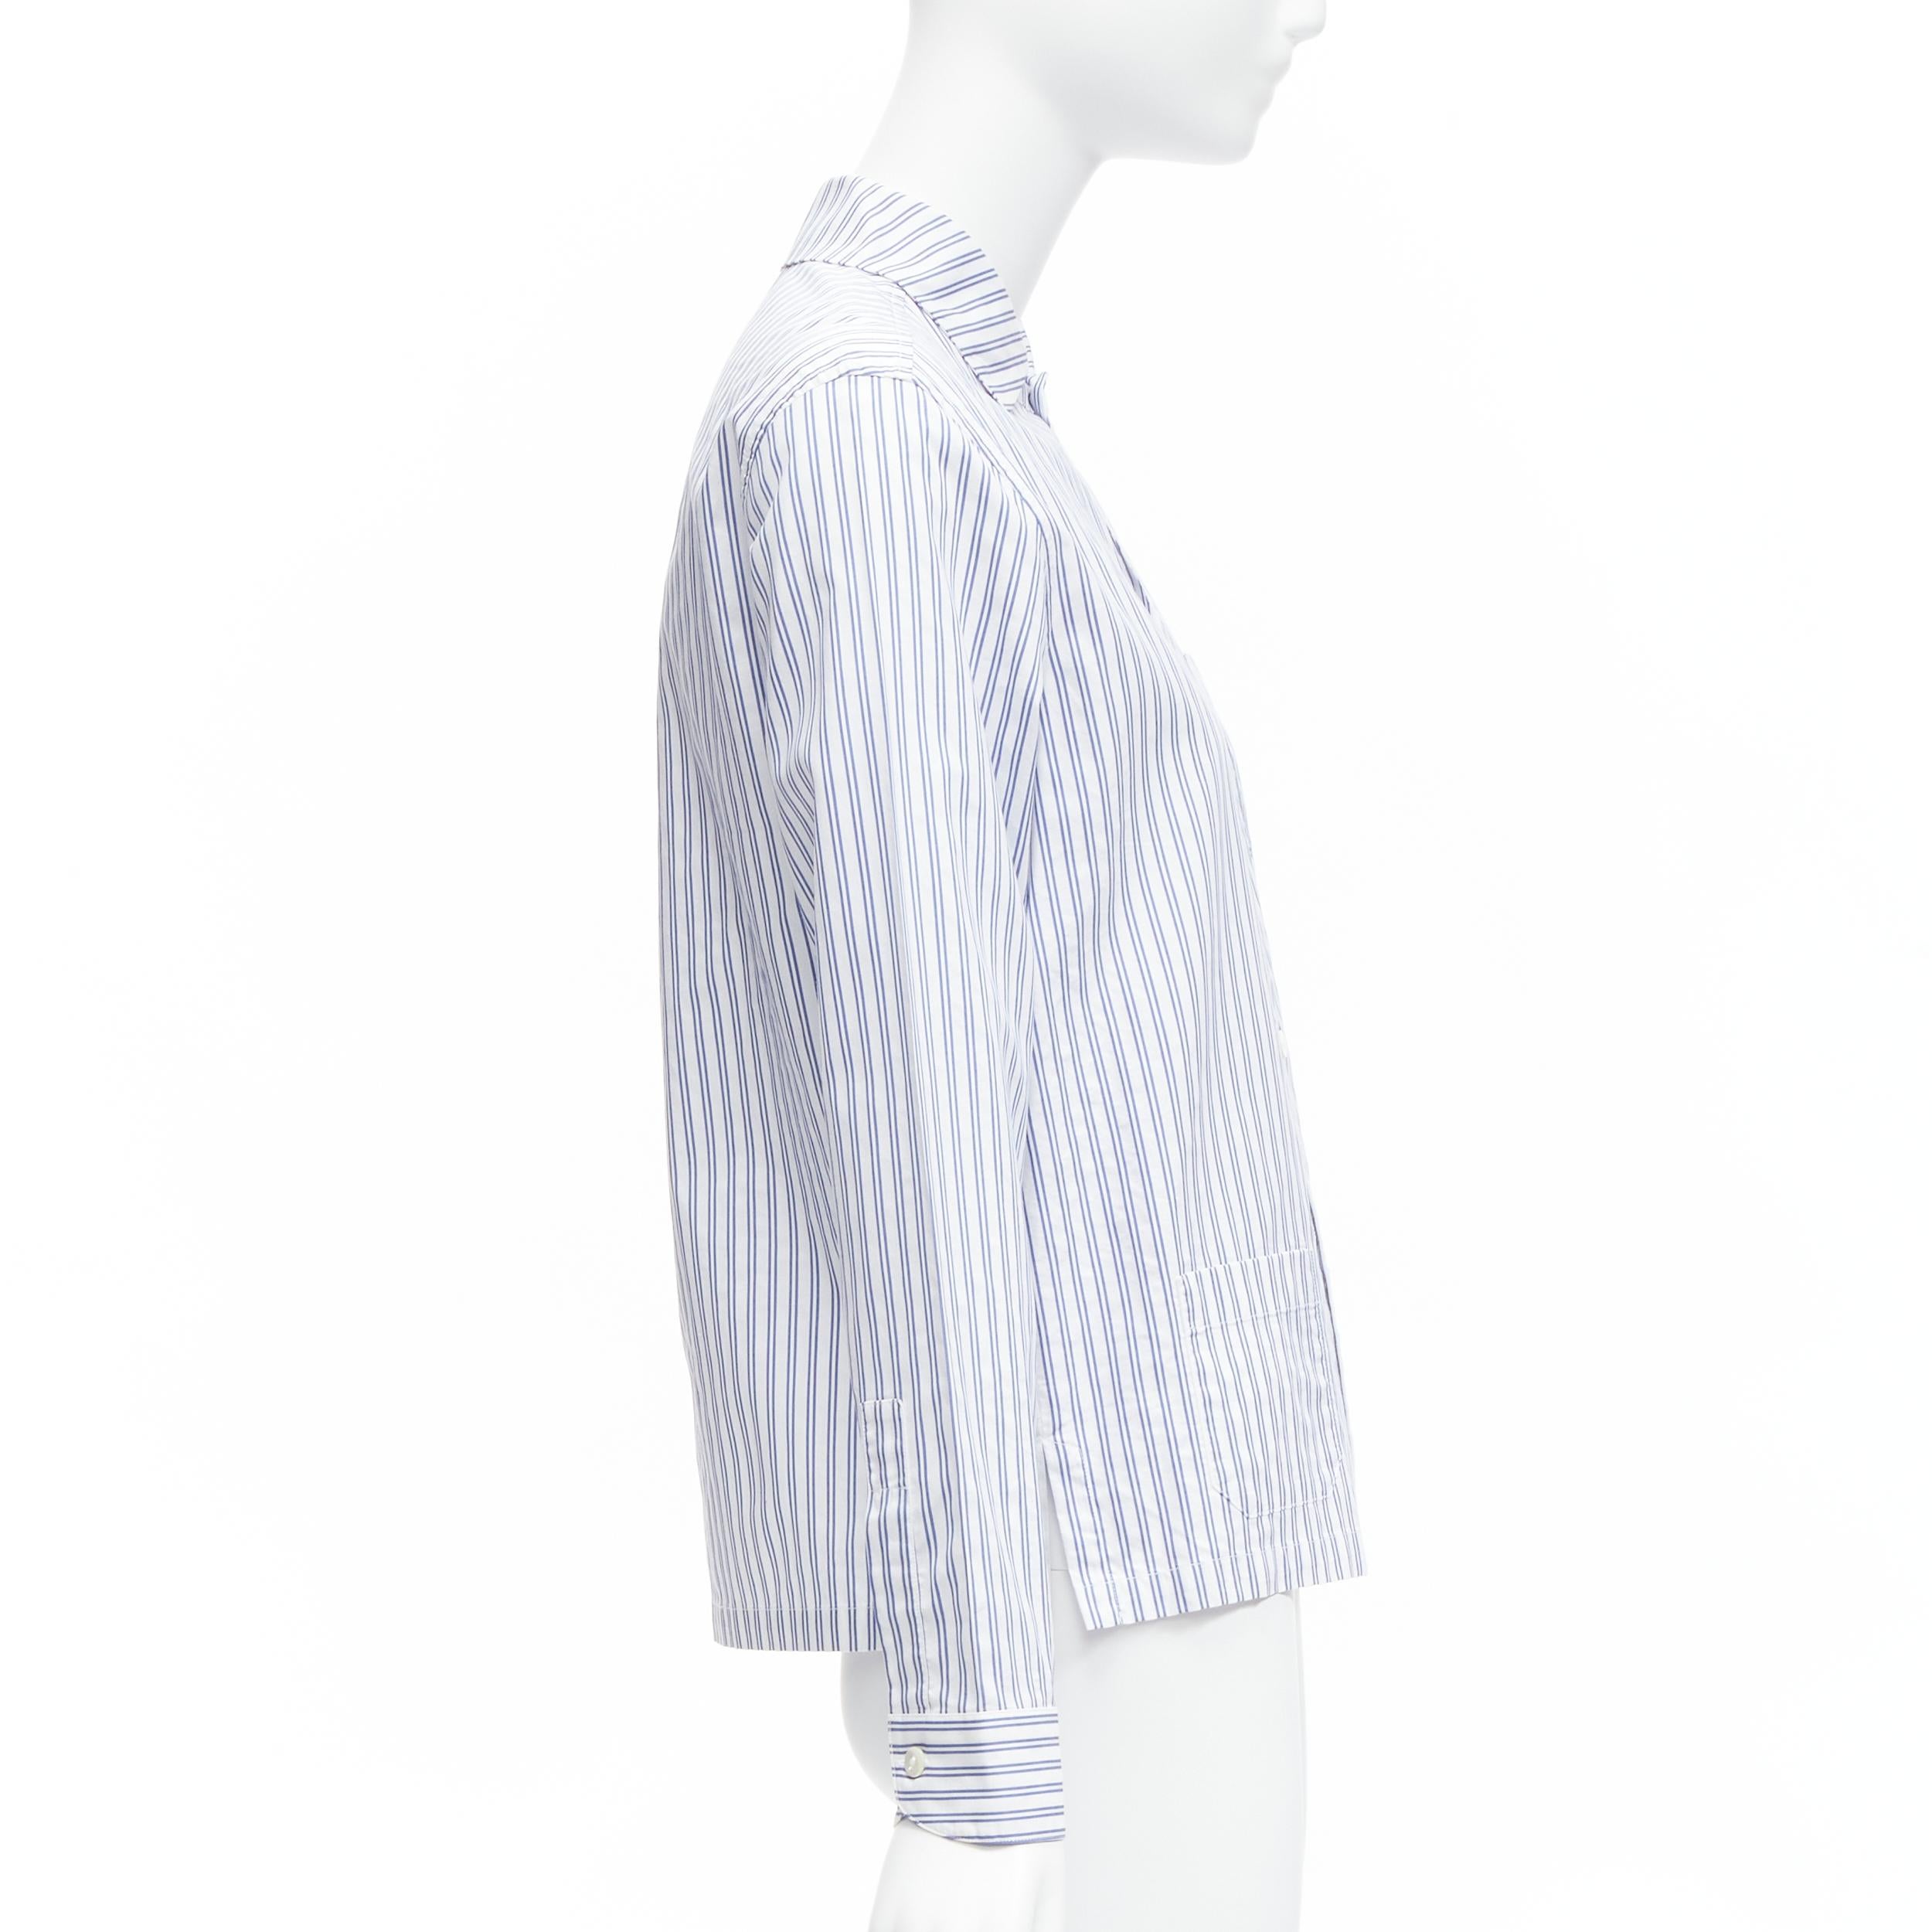 GUCCI 2017 rabbit print blue white striped cotton pyjama dress shirt IT44 L In Excellent Condition For Sale In Hong Kong, NT